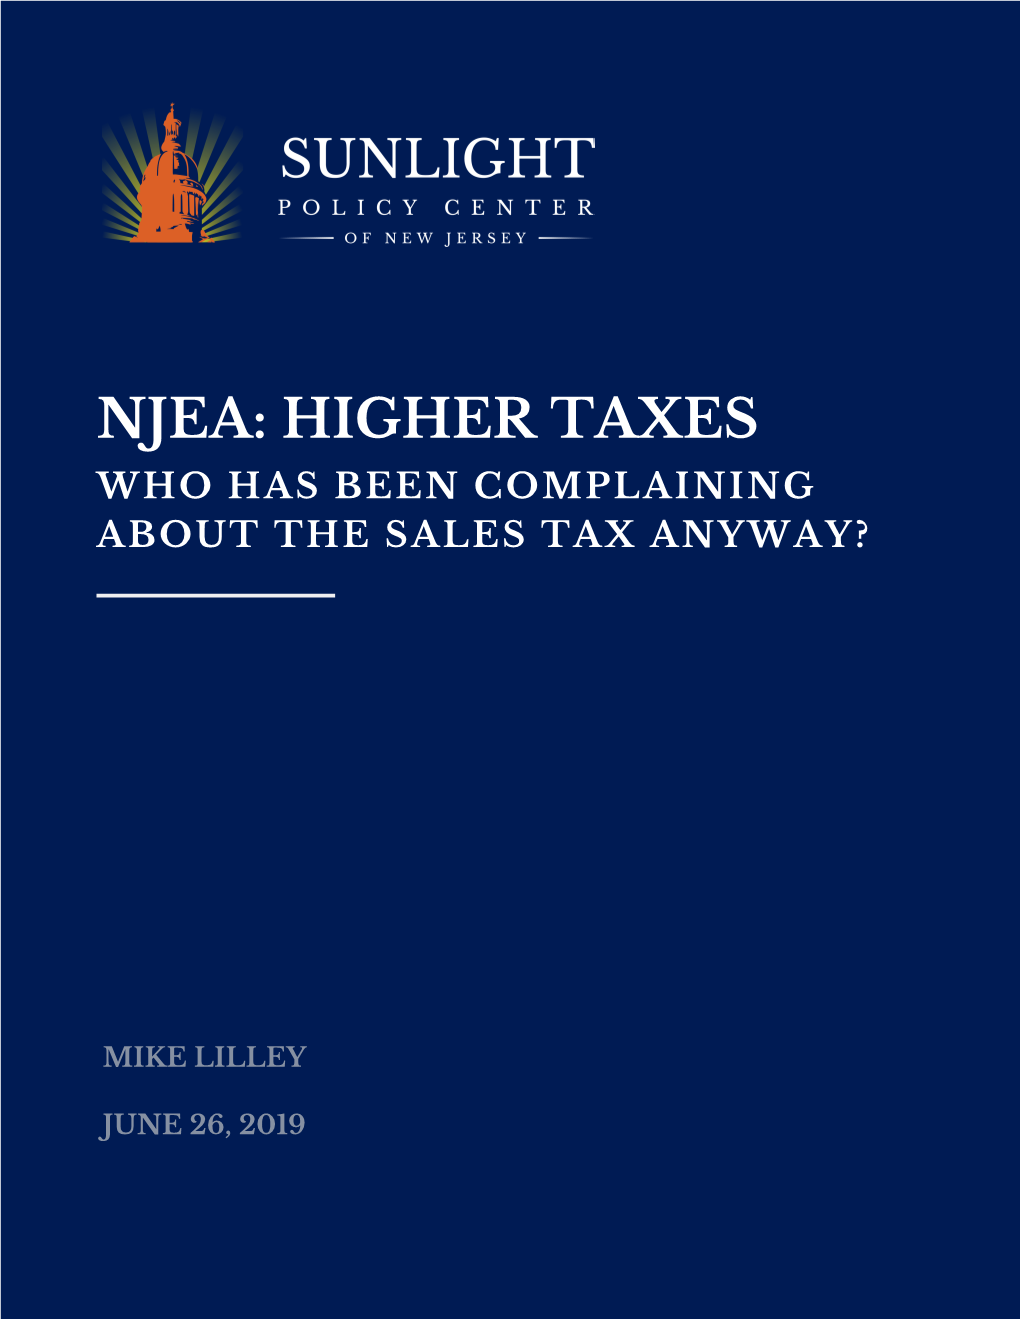 Higher Taxes Who Has Been Complaining About the Sales Tax Anyway?